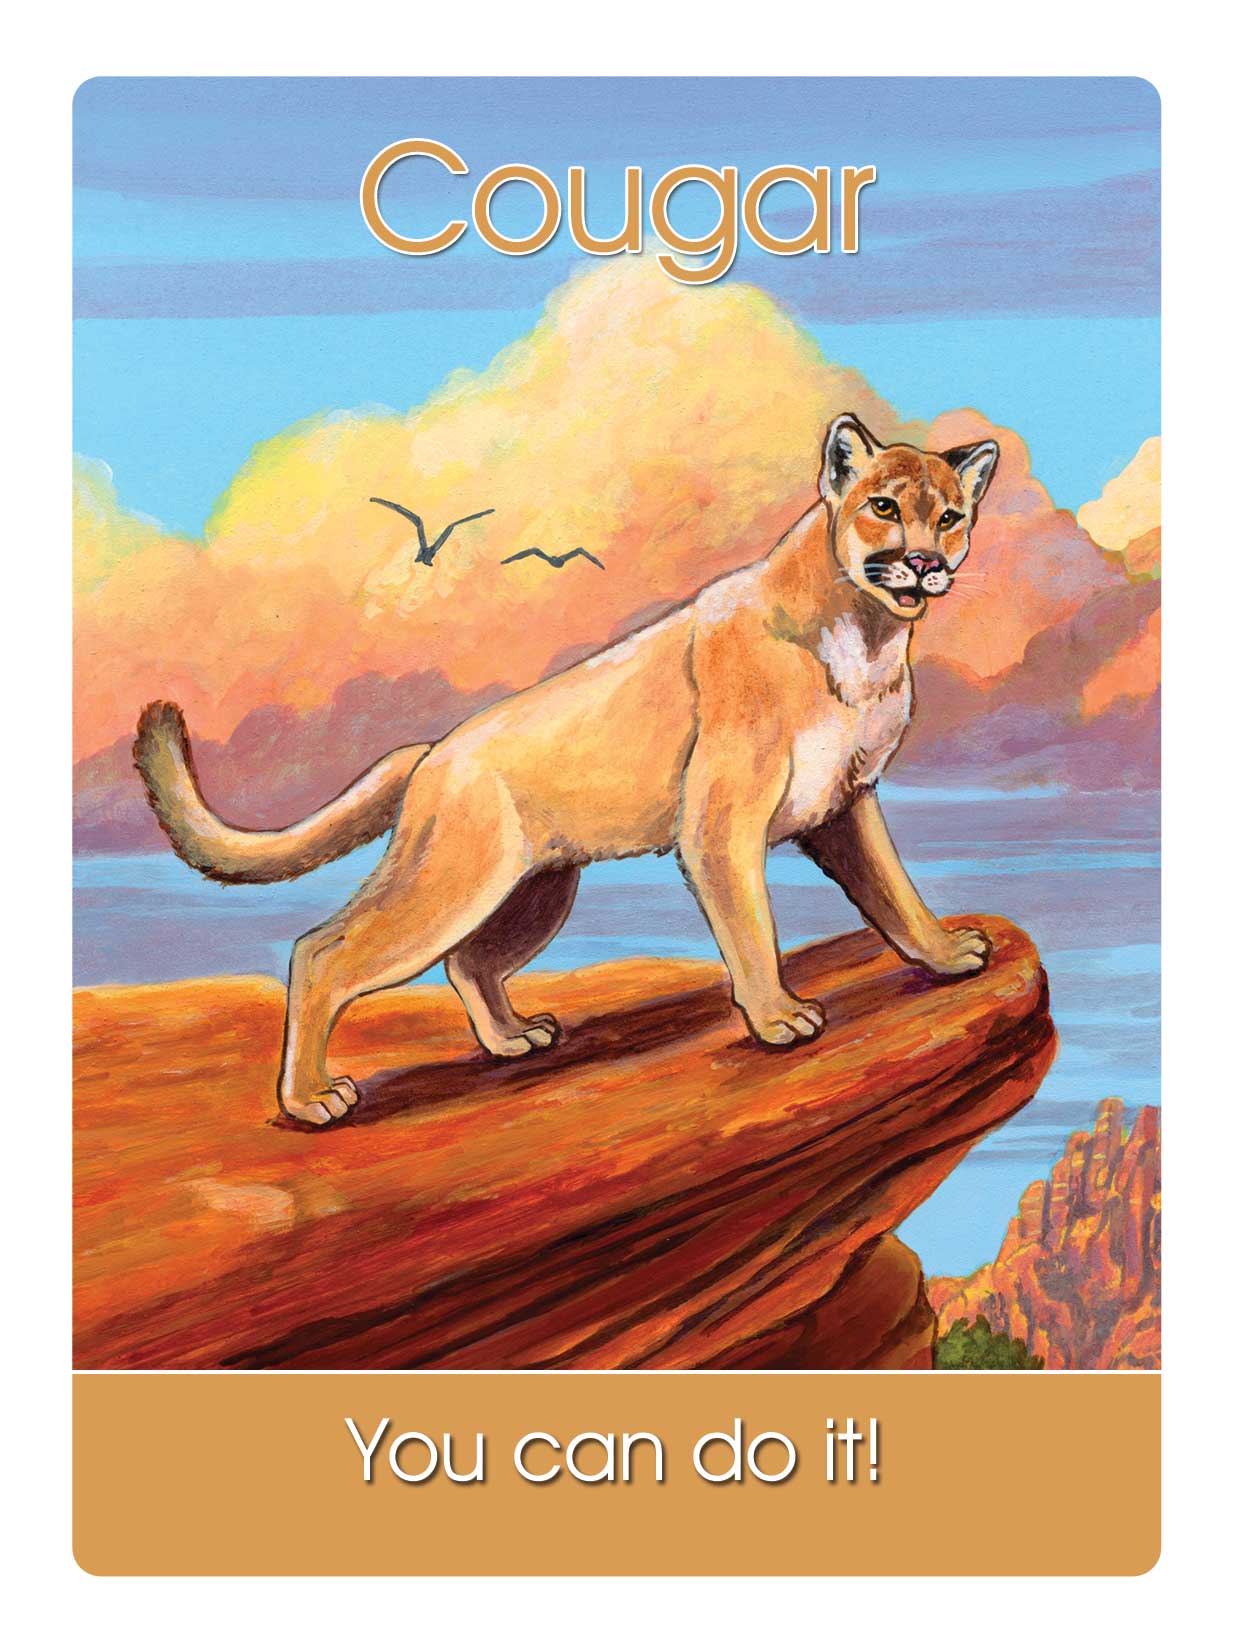 9) Cougar Says: You Can Do It! - Dr. Steven Farmer